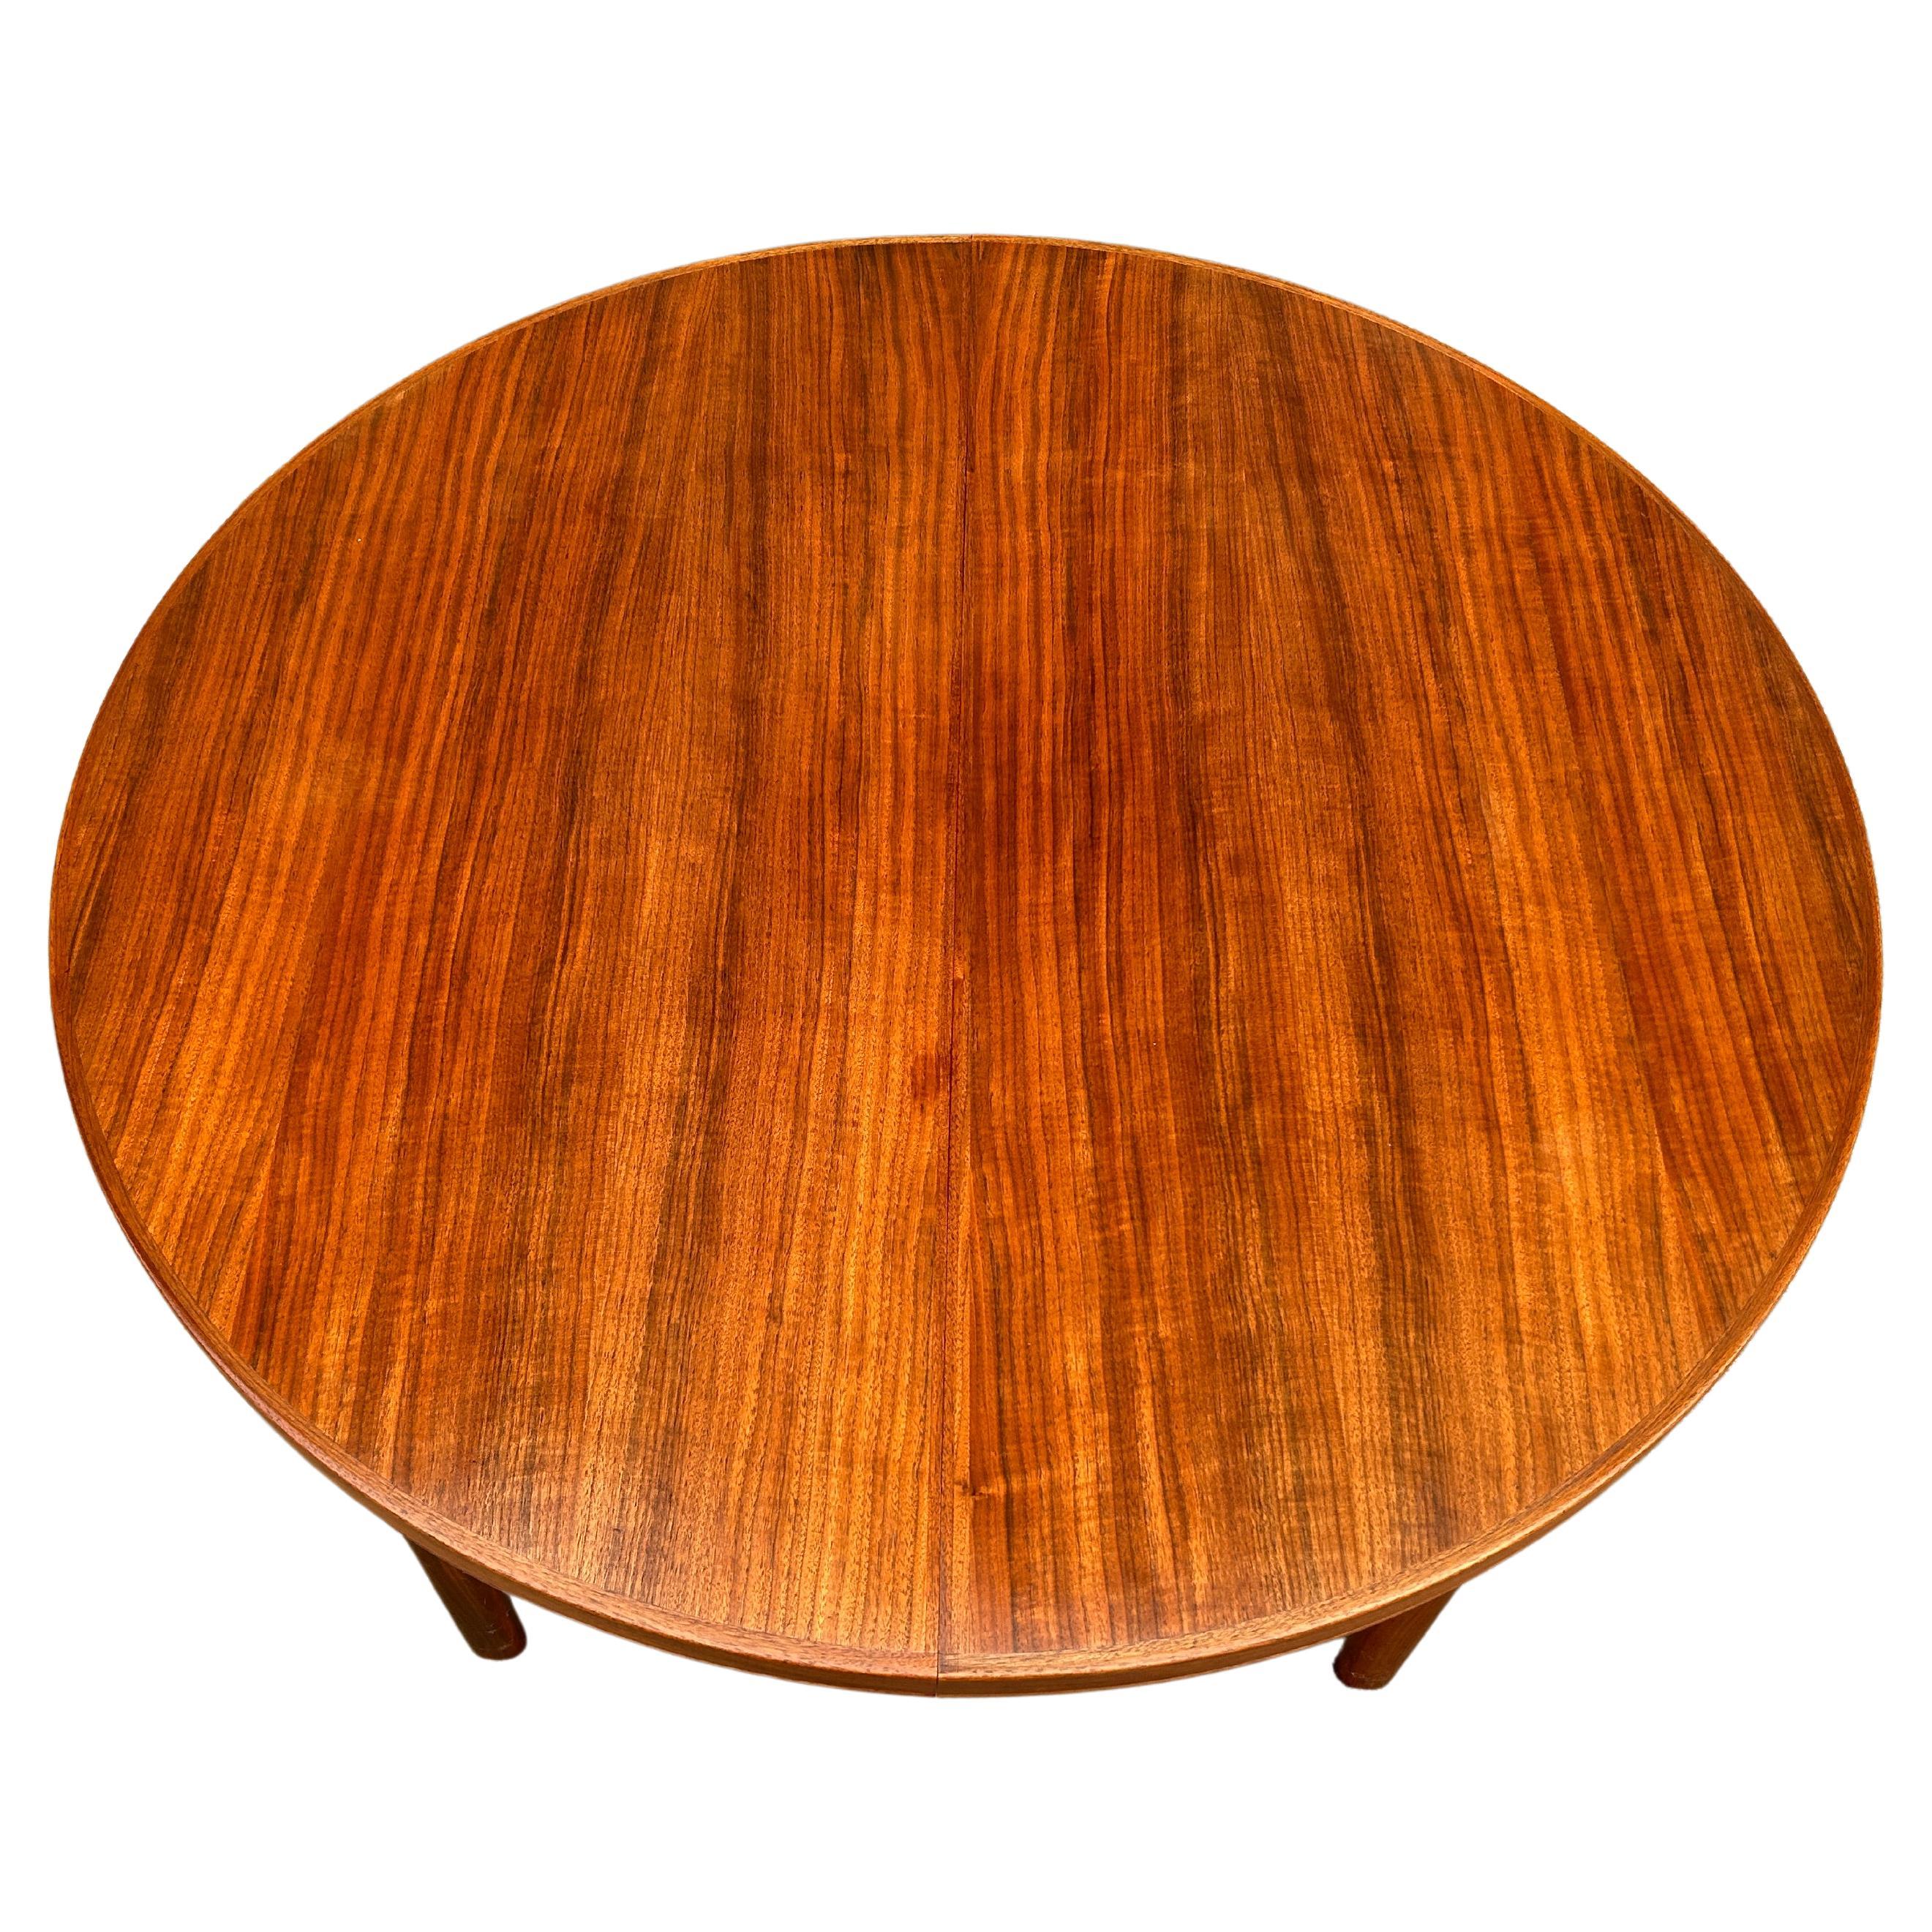 Midcentury Swedish Modern Round dining table. This table is very high quality hand built in Sweden. Solid teak legs with 4 leg base. This table is in great vintage condition, the (2) leaves. Beautiful wood grain and edge detail. Beautiful teak